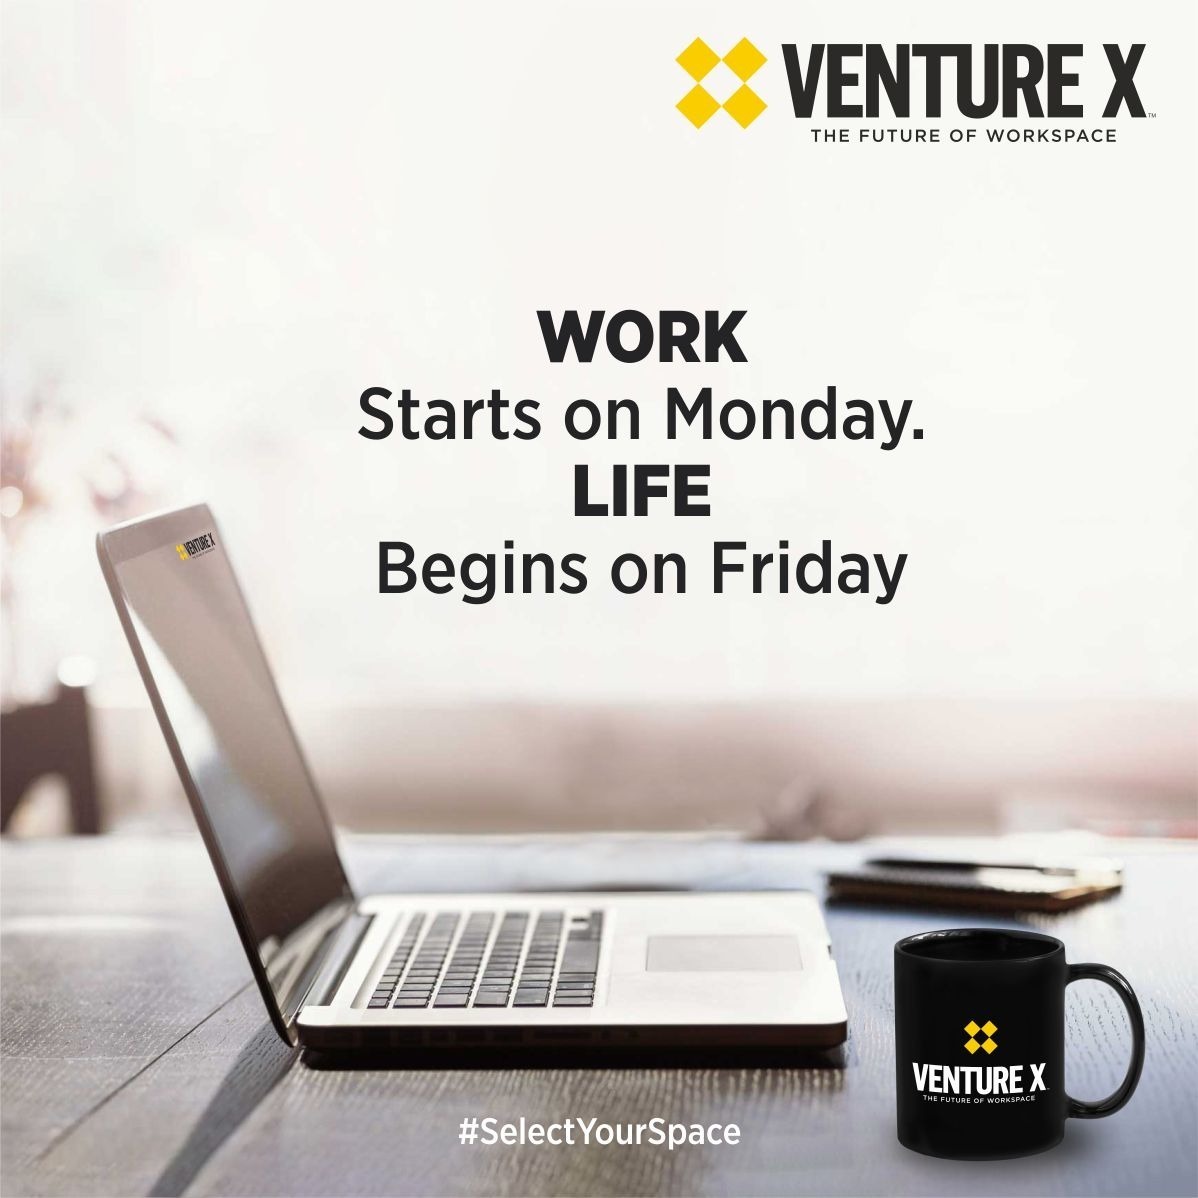 Who else is as excited as we are for the weekend?

#venturexindia #vtx #venturex #selectyourspace #tgif #futureofworkspace #coworkingspaces #coworking #coworkingoffice #businessowner #ceo #beyourownboss #virtualoffice #business #sharedworkspace #flexibleworkspace